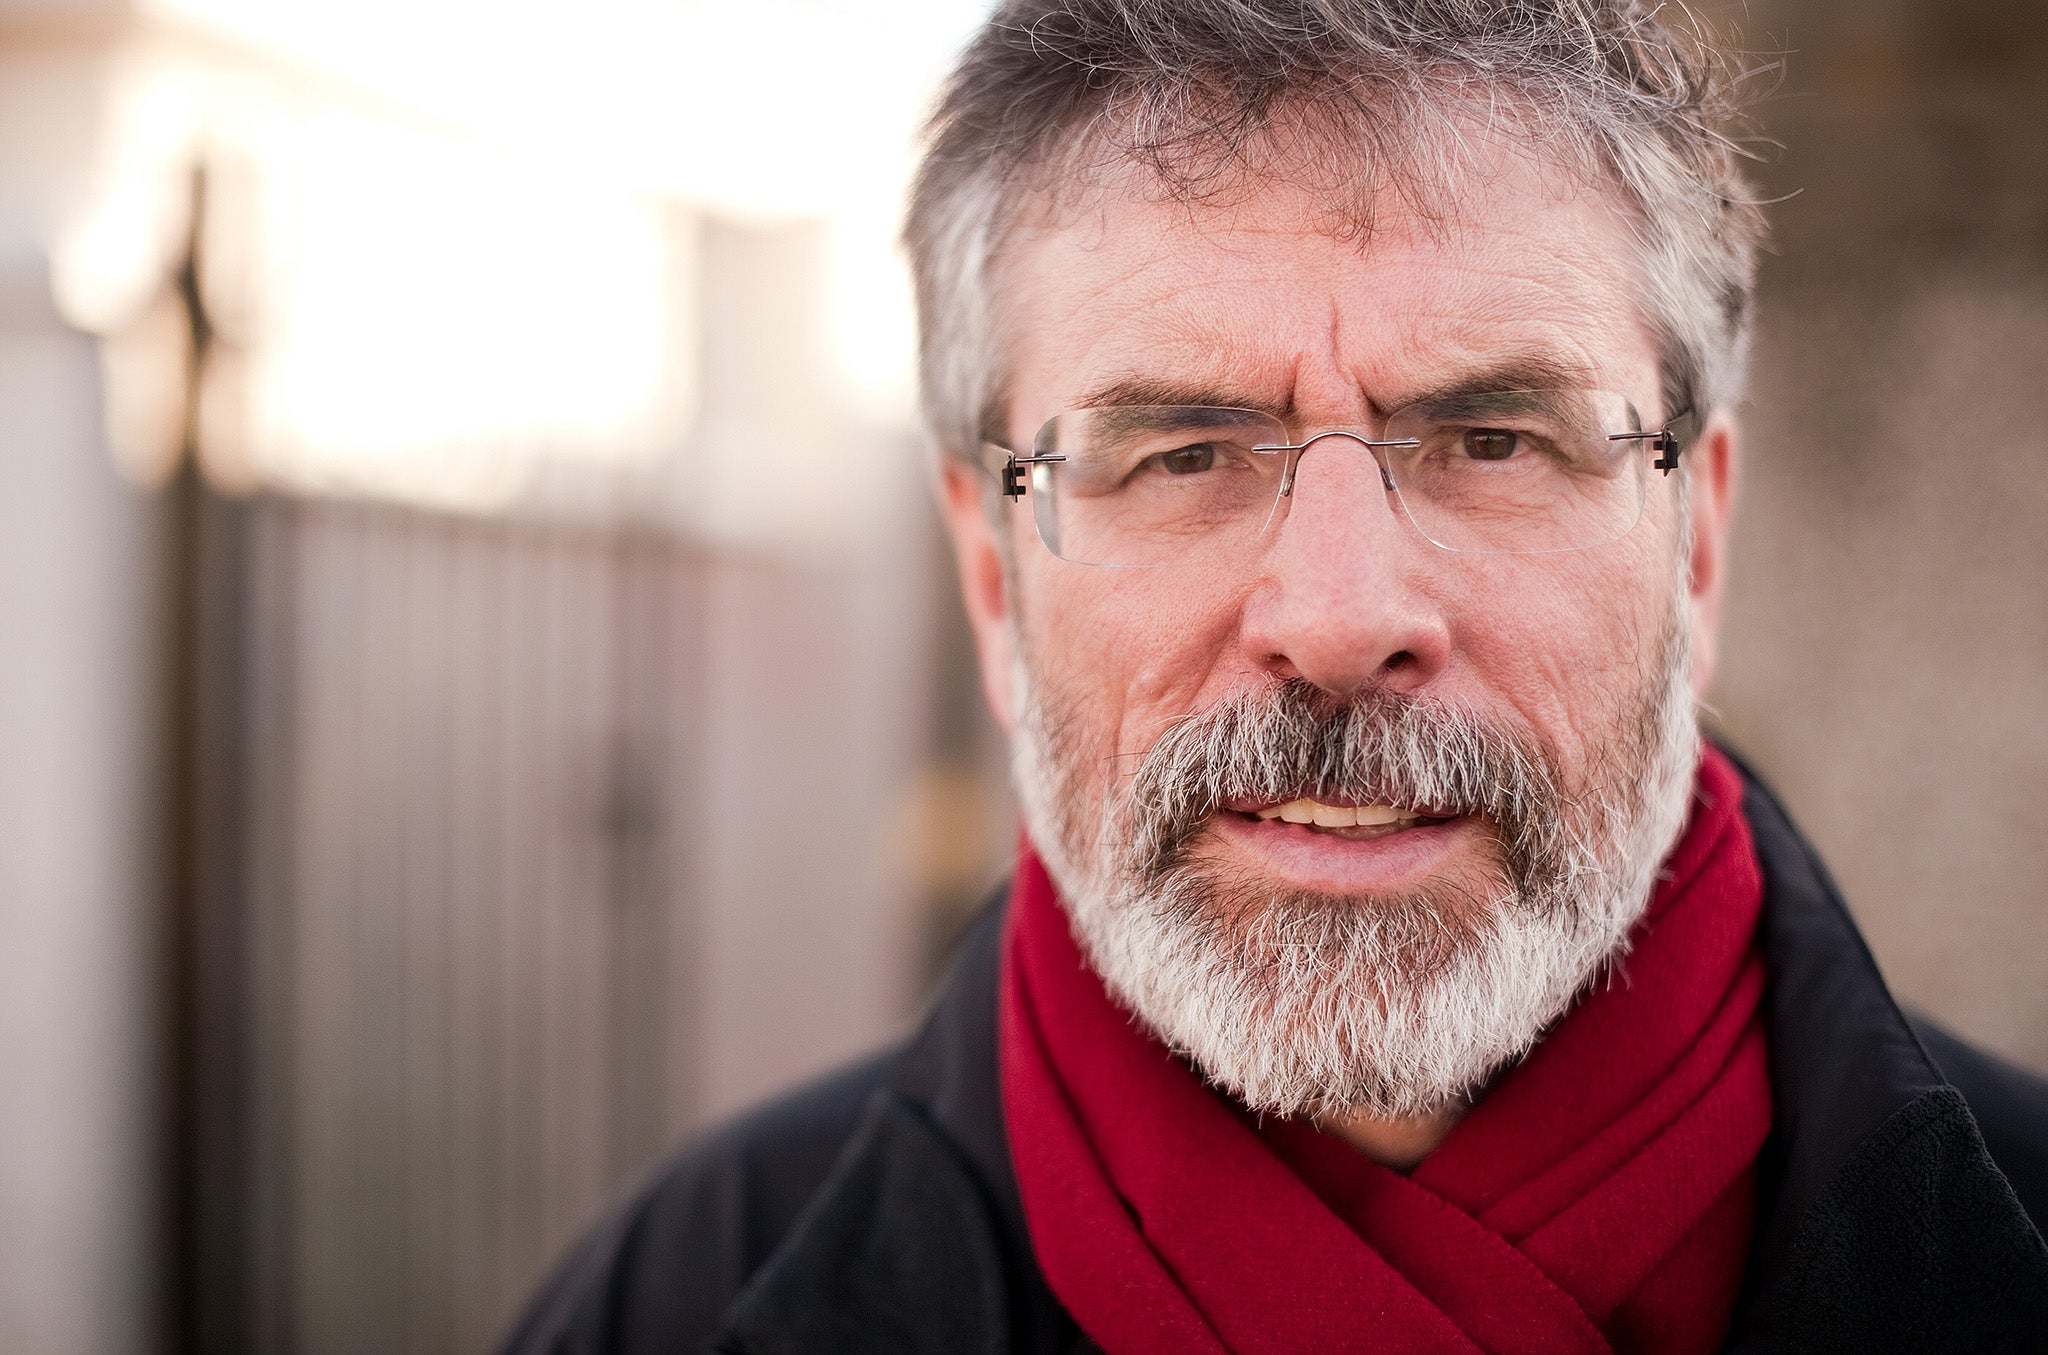 Sinn Fein leader Gerry Adams trampolines naked with his dog